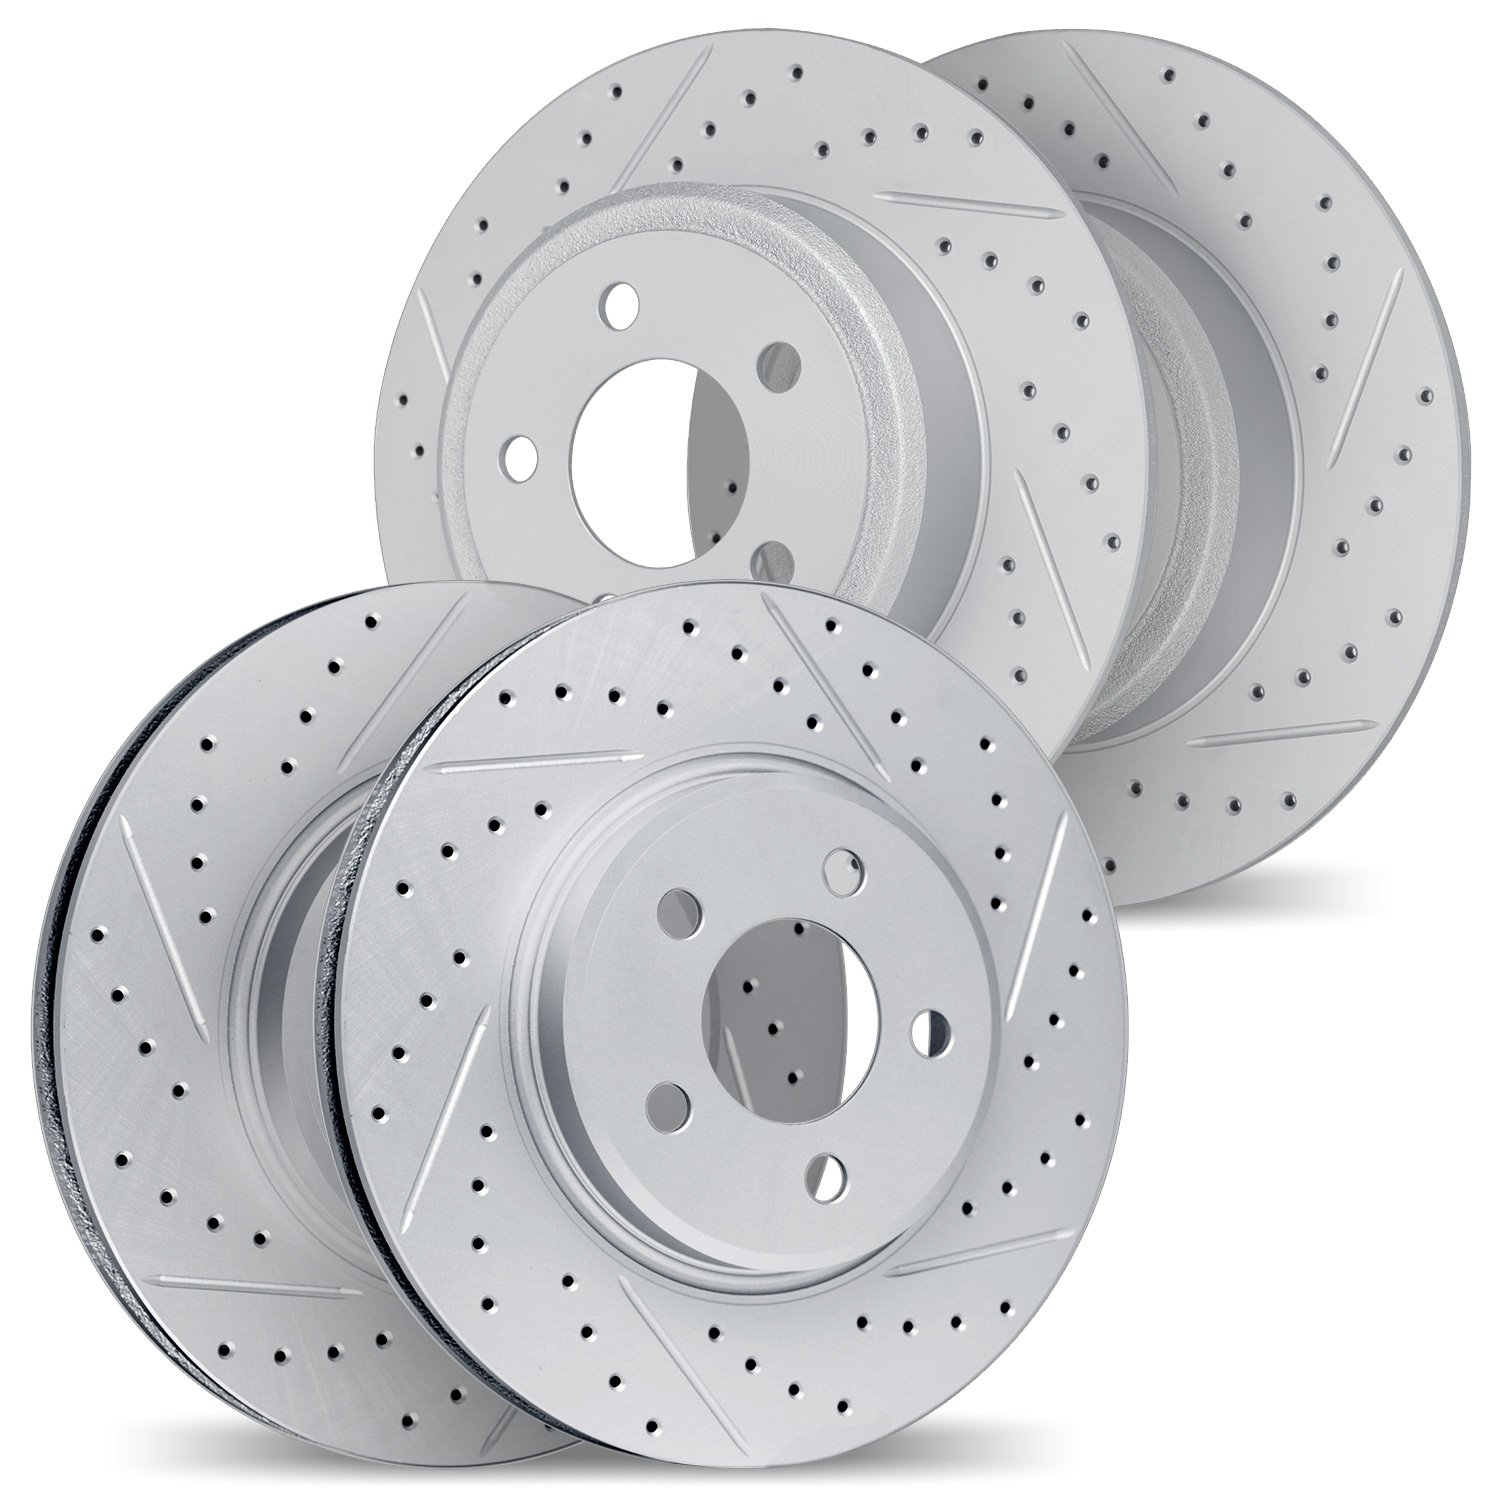 2004-03047 Geoperformance Drilled/Slotted Brake Rotors, 2005-2010 Kia/Hyundai/Genesis, Position: Front and Rear